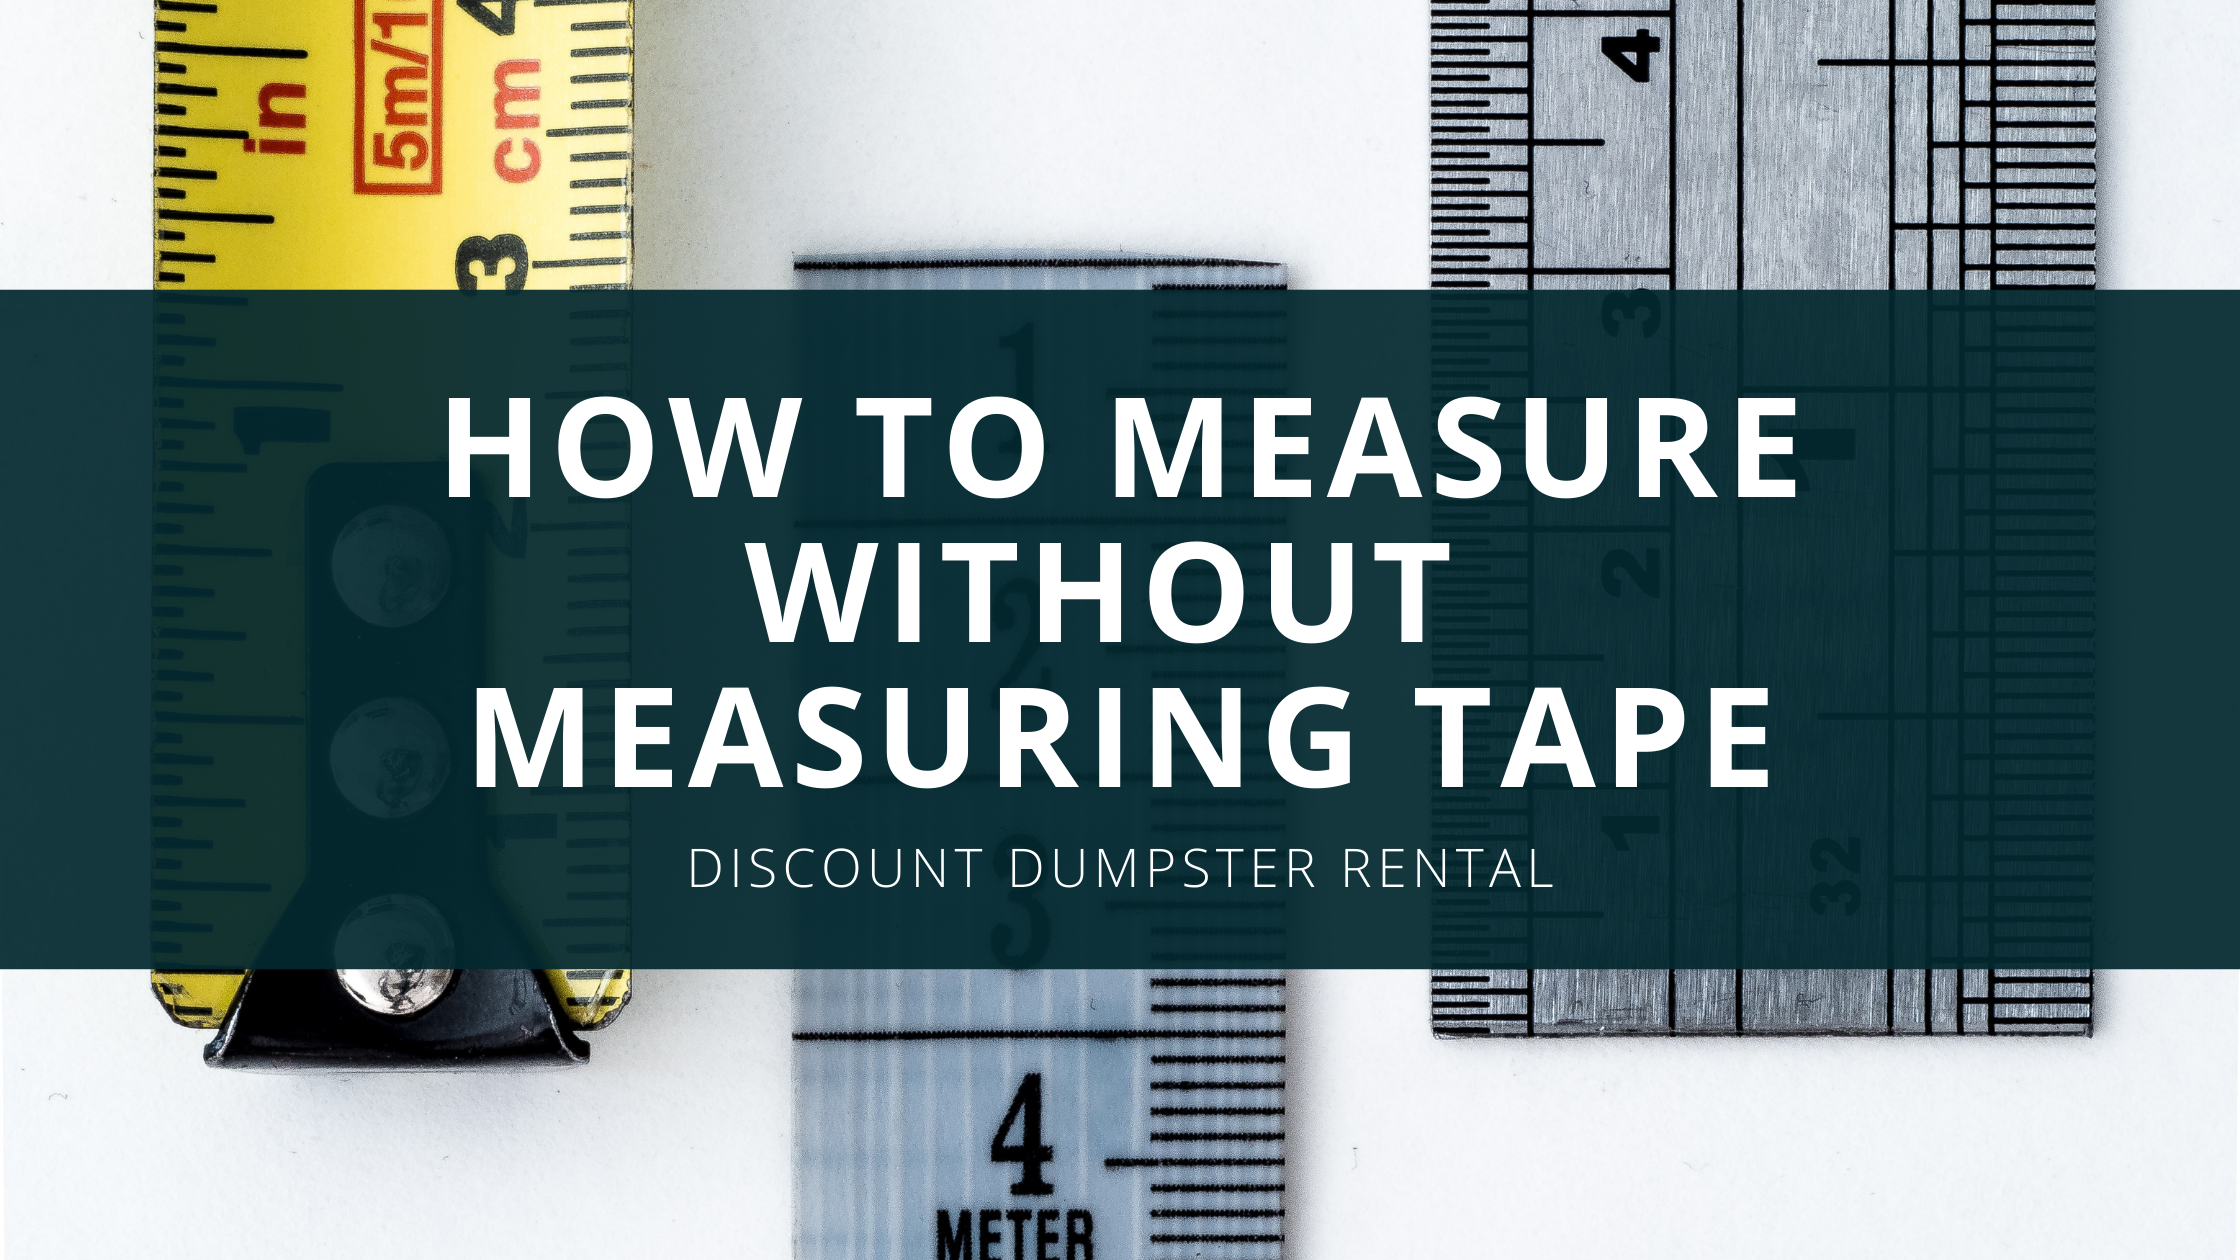 Take a soft tape measure, now wrap the tape measure around your finger